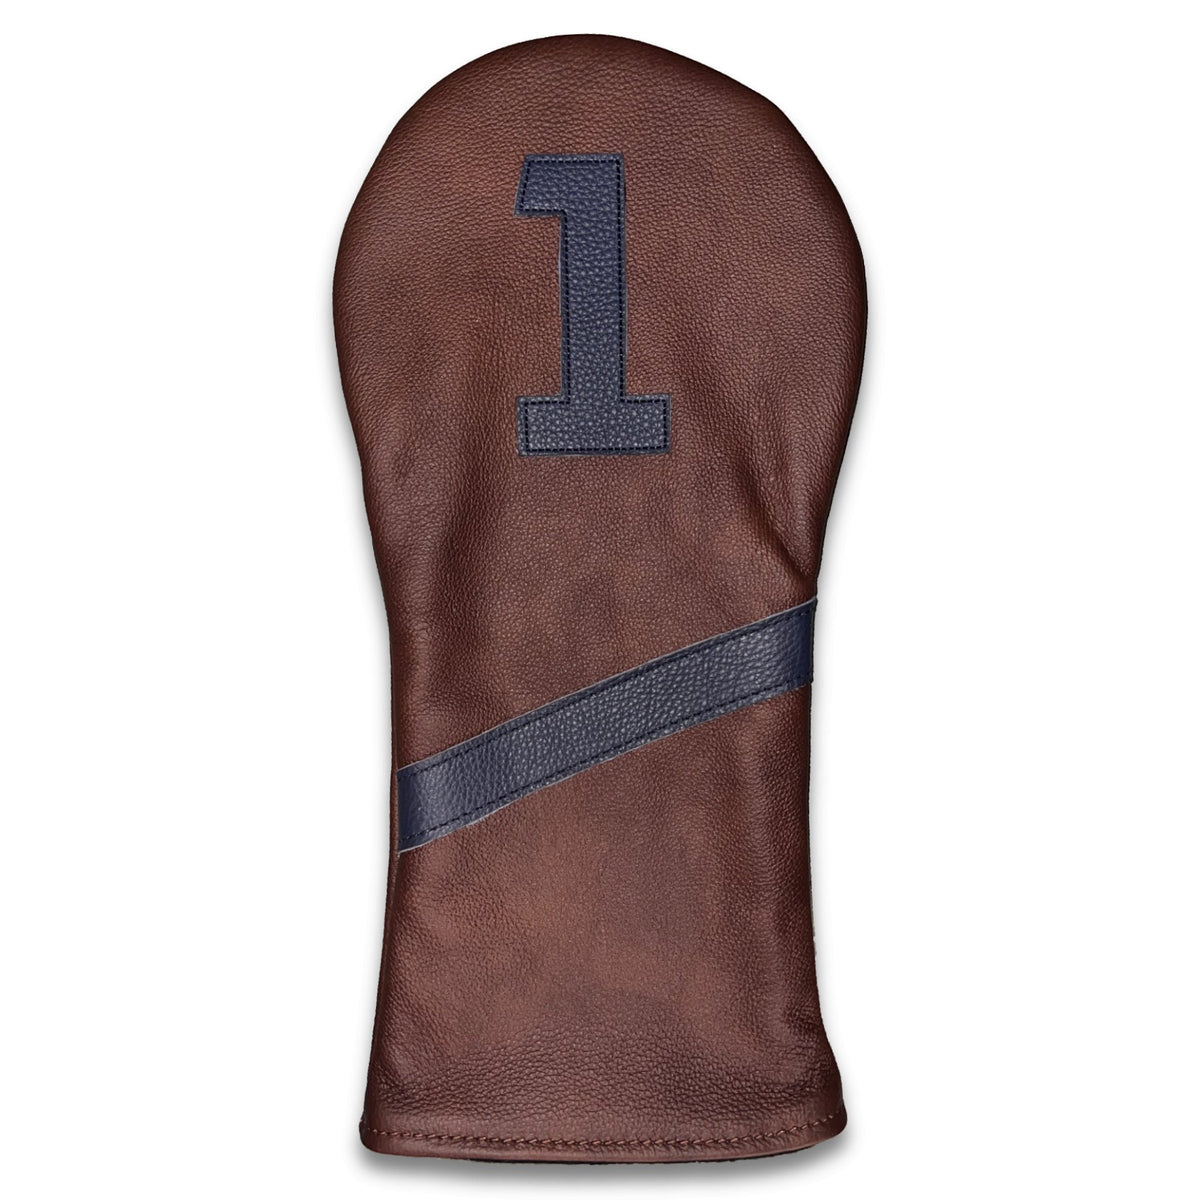 Custom Leather Head Cover (Stripe + Number)